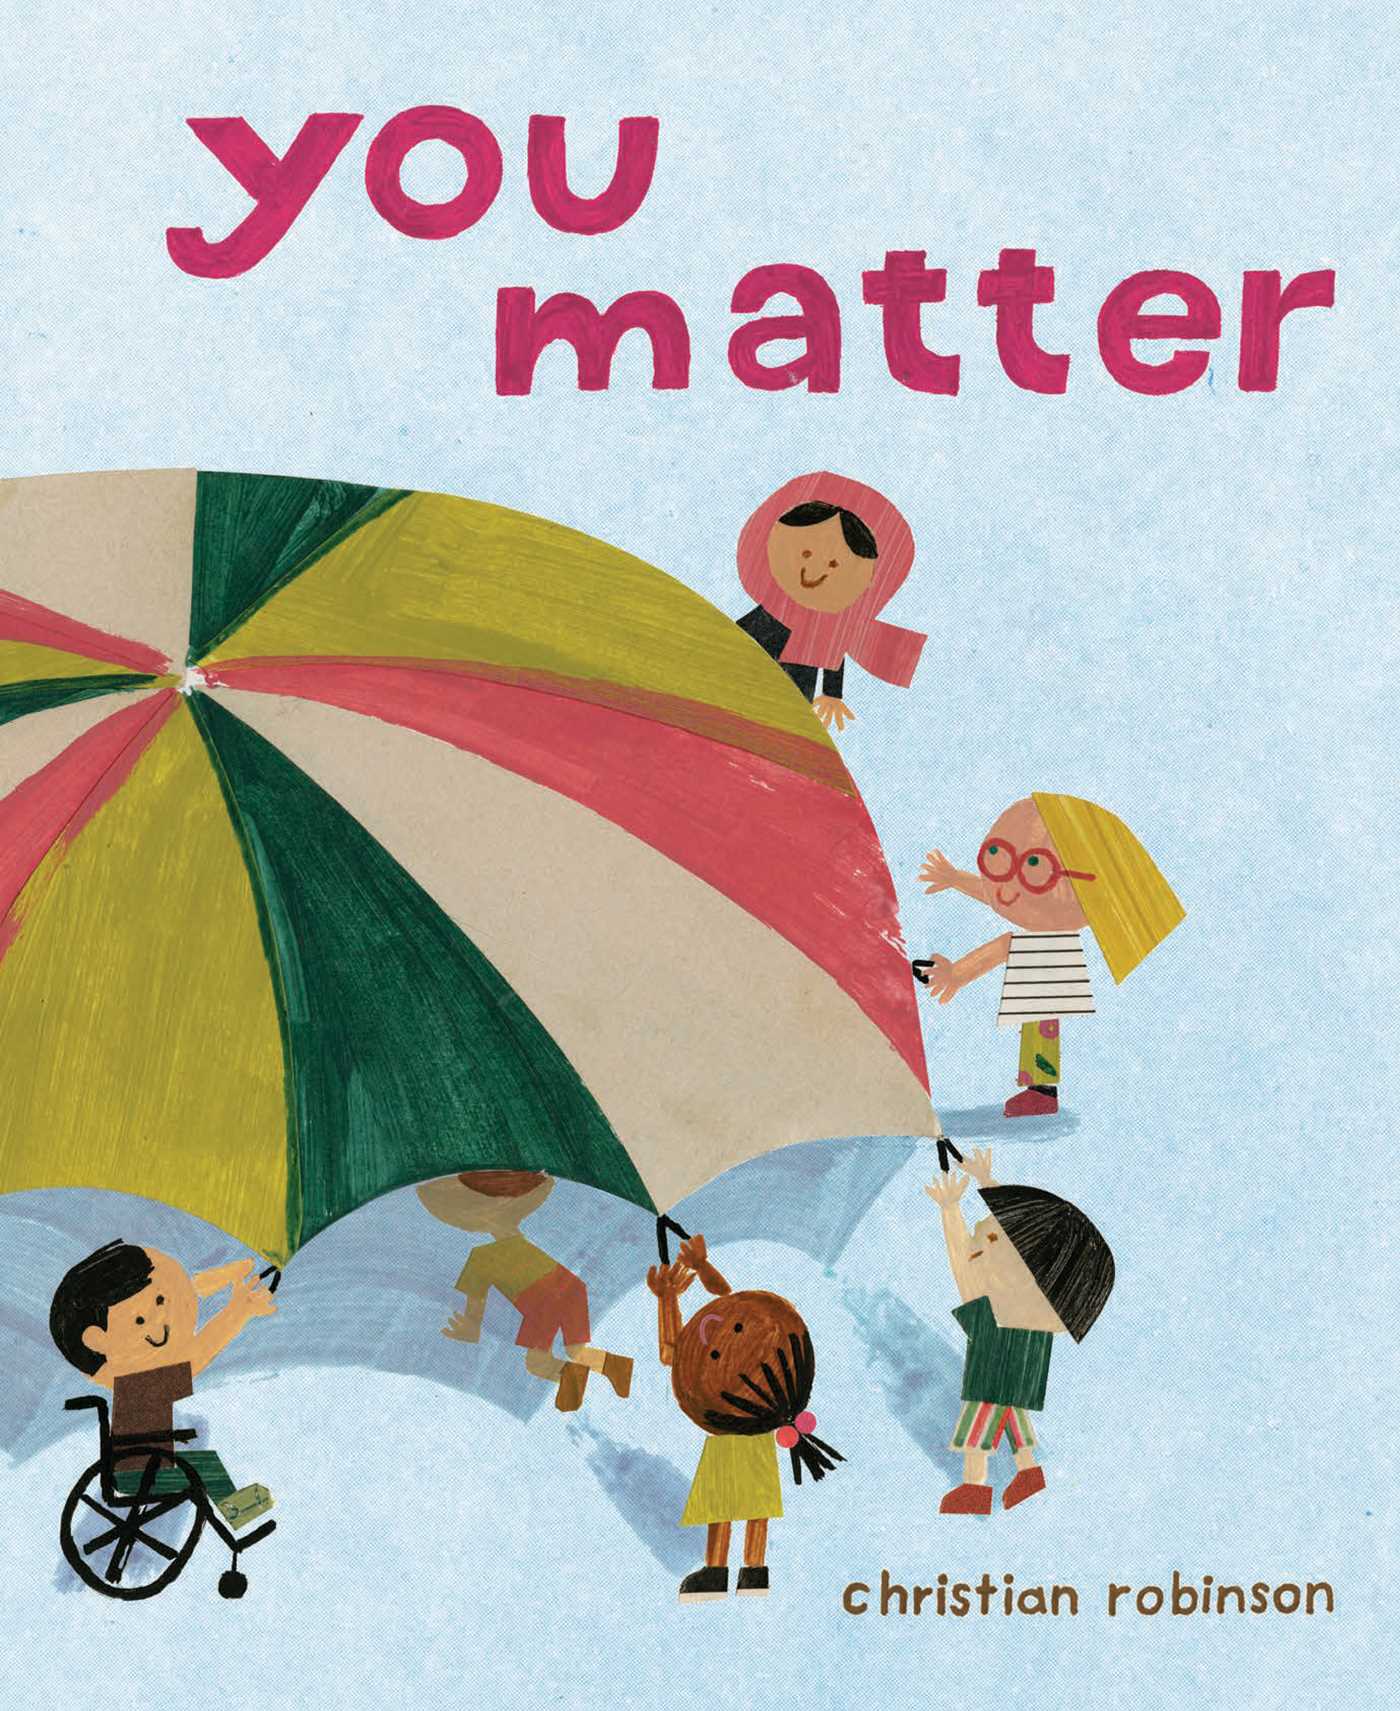 You Matter By Christian Robinson Illustrated by Christian Robinson